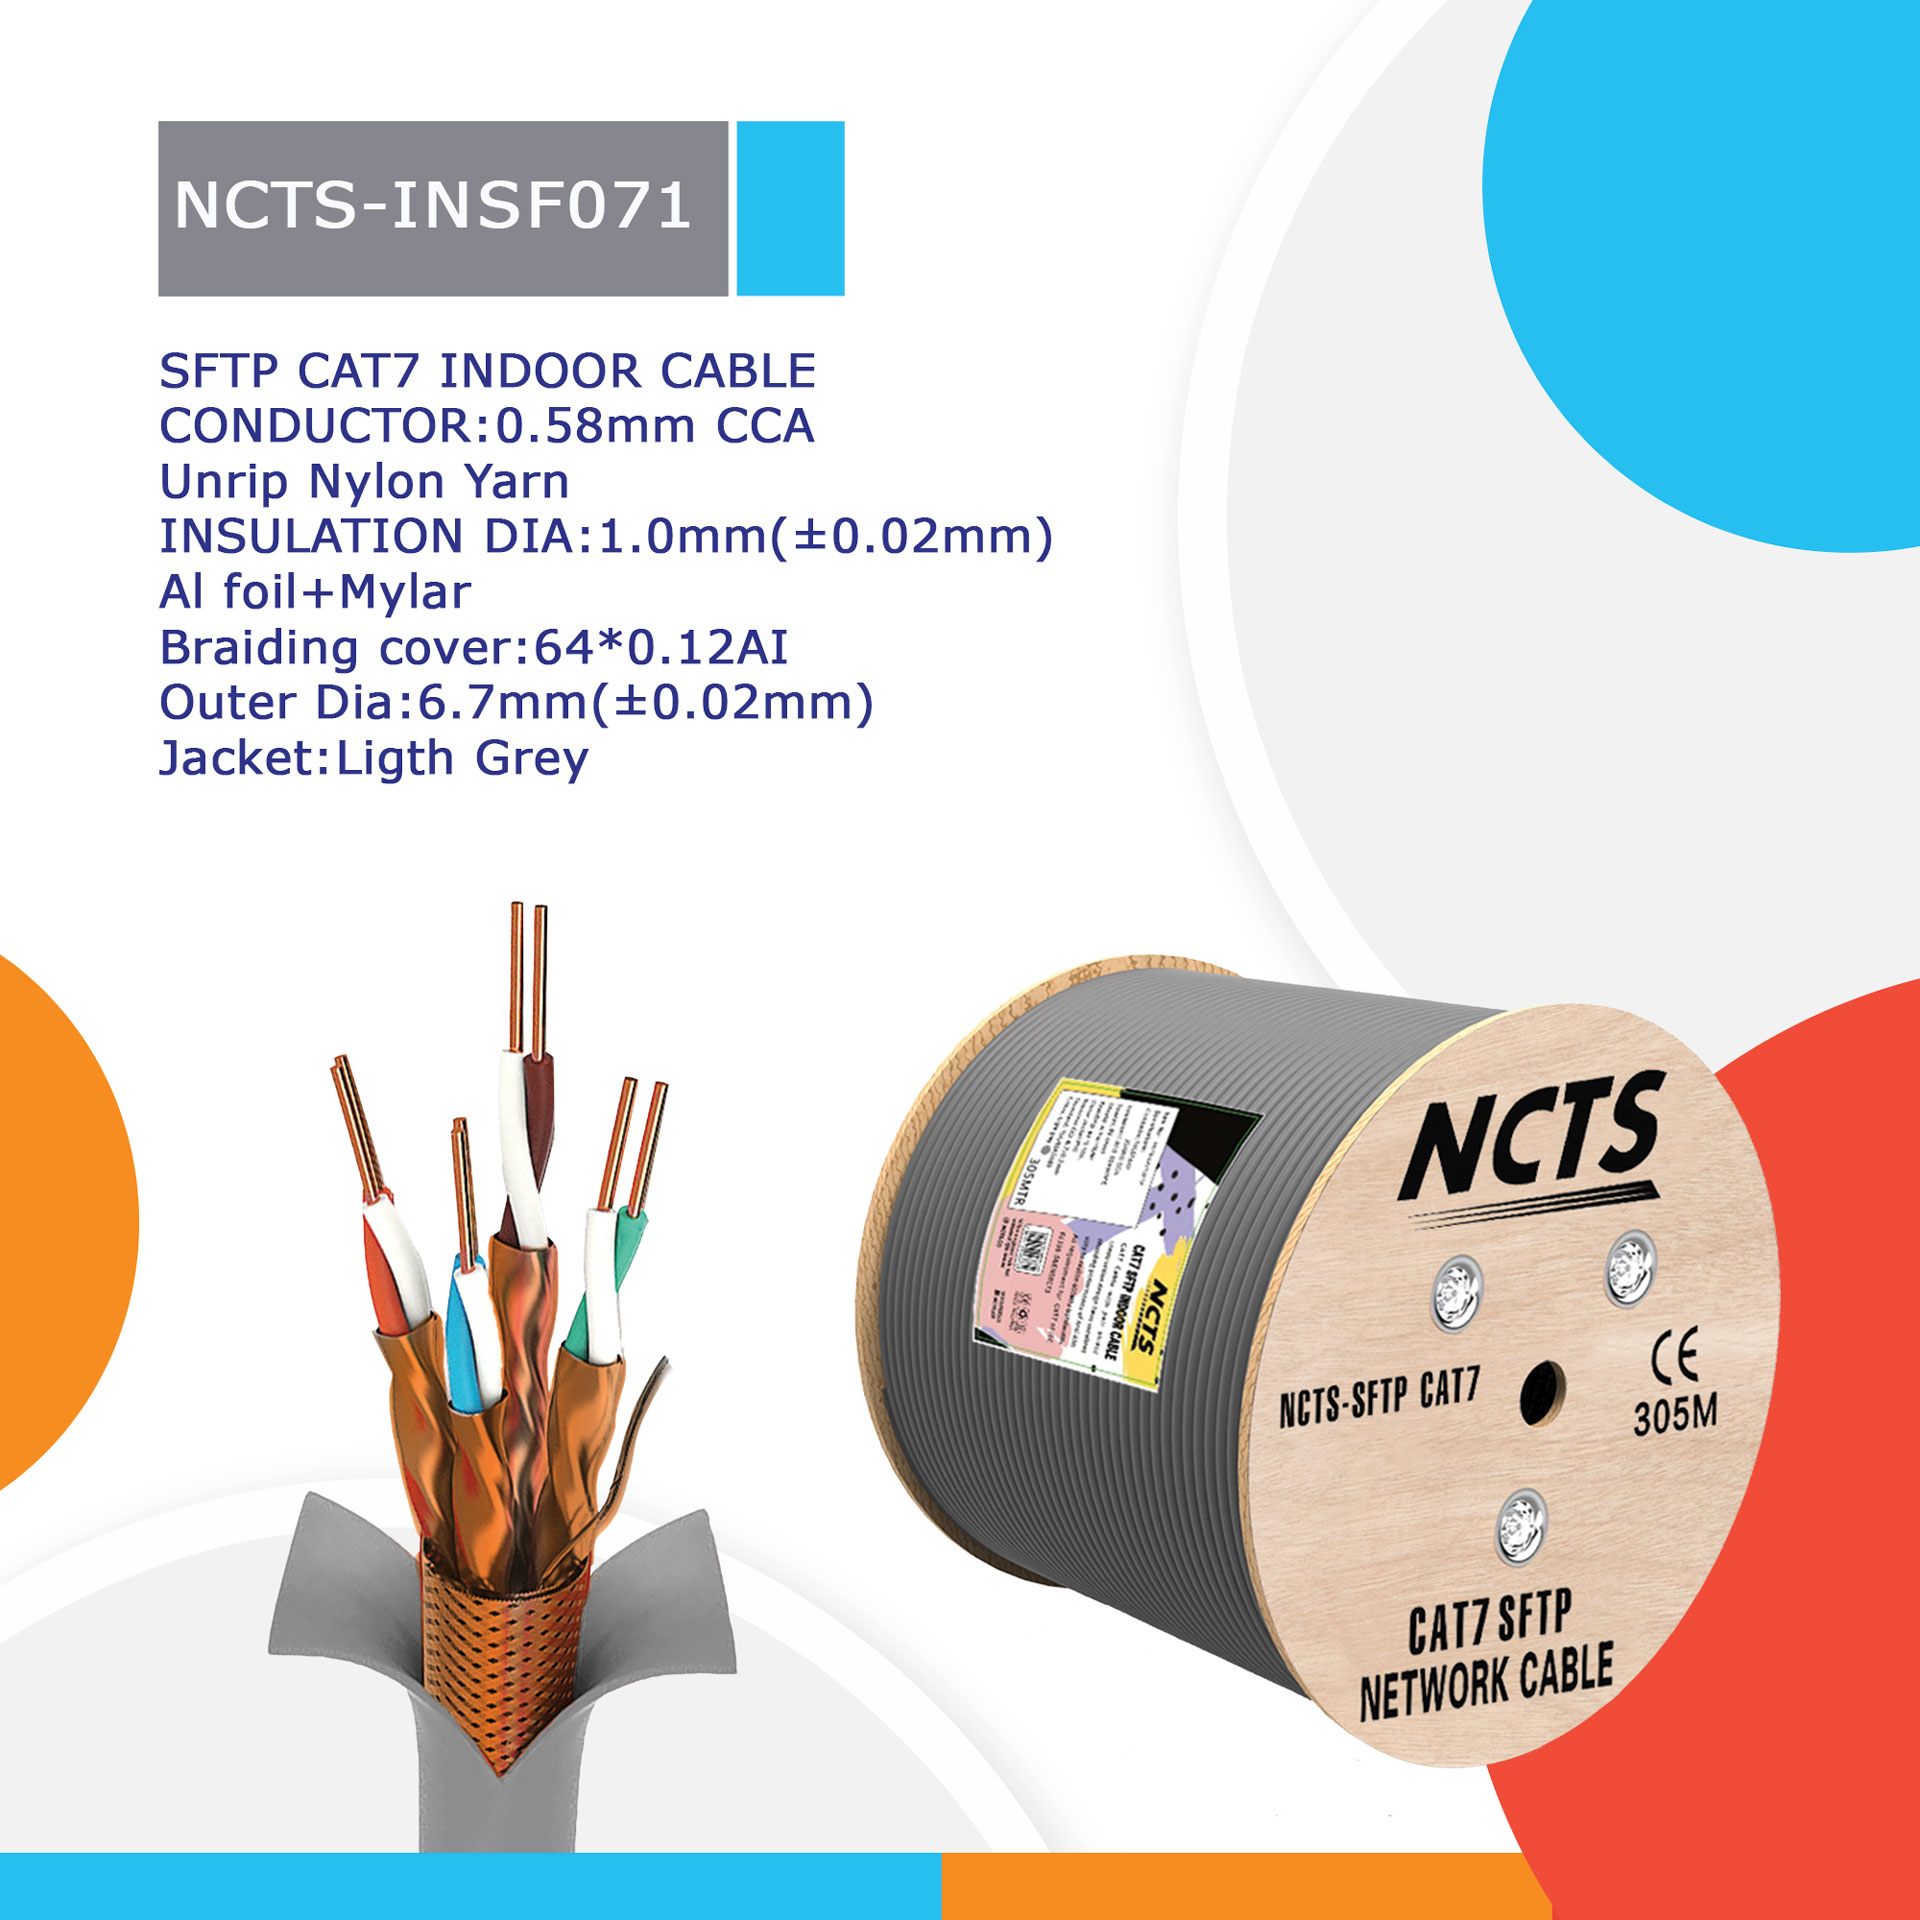 NCTS-INSF071